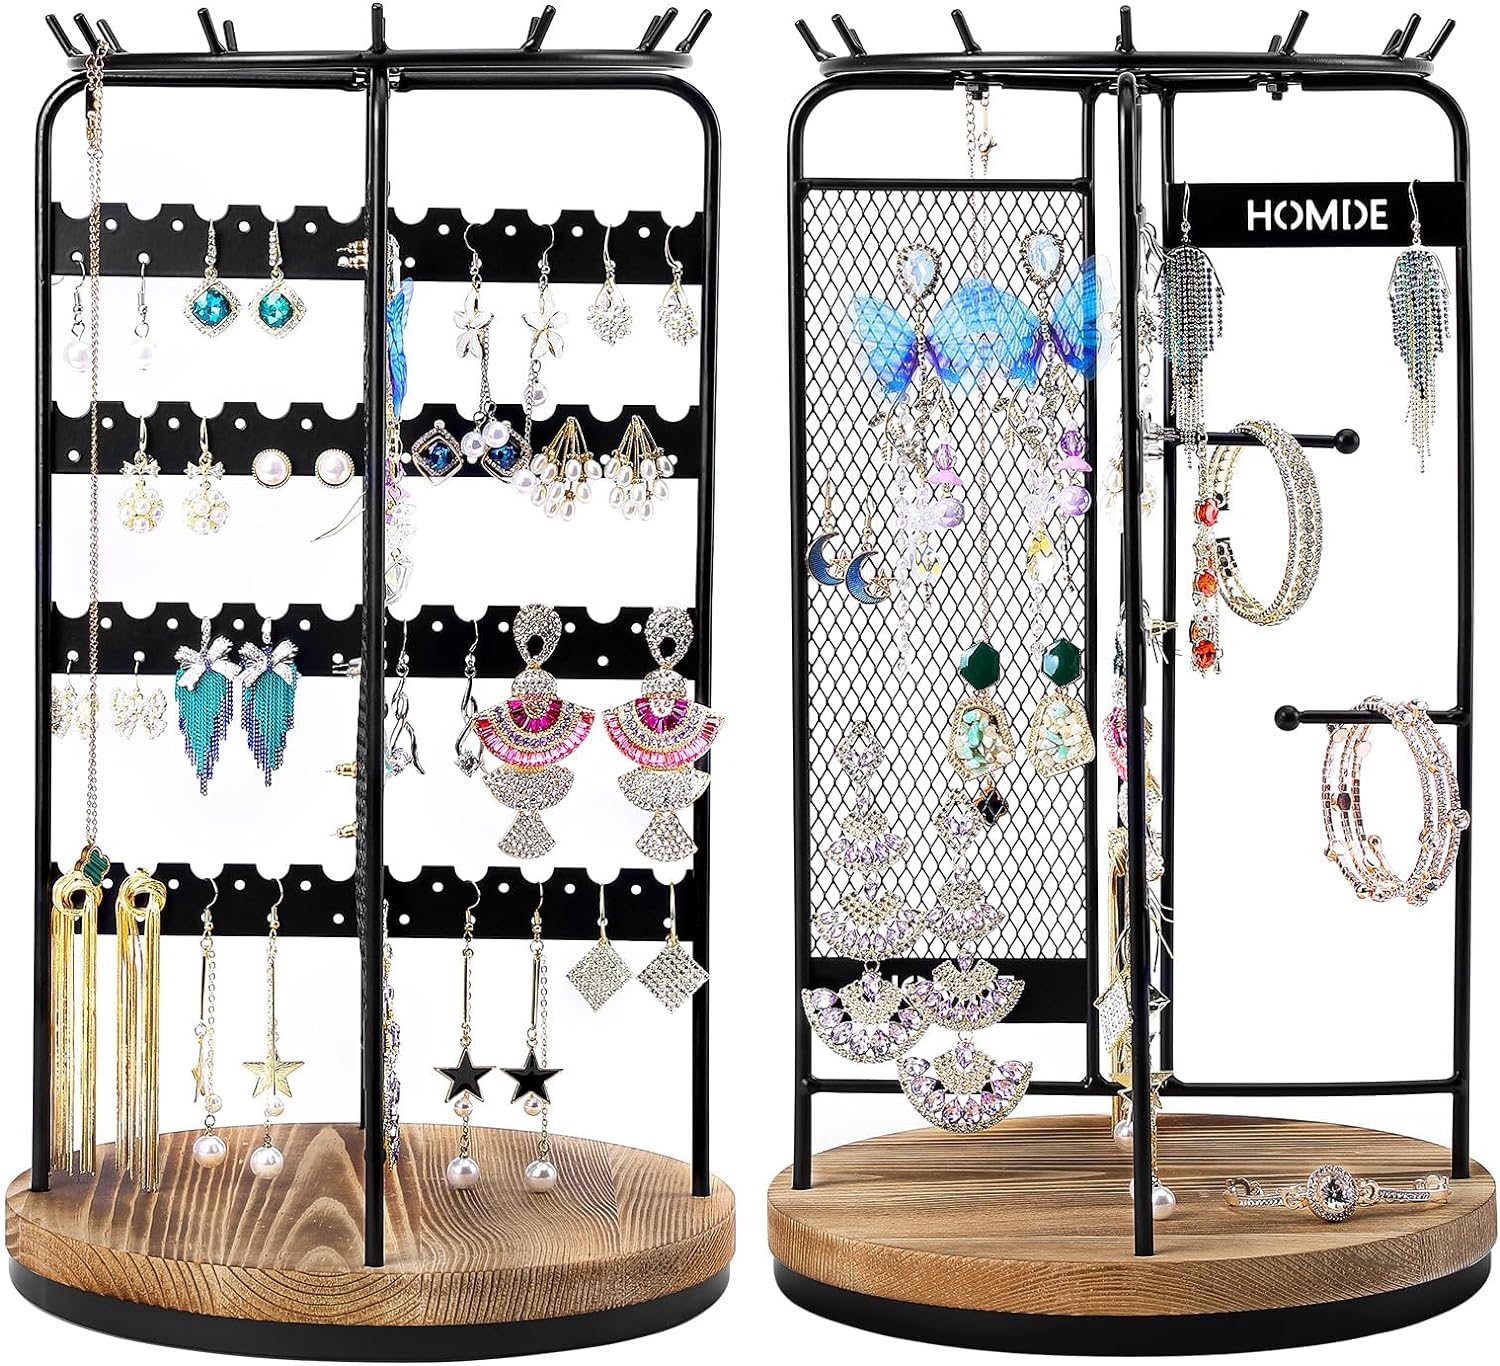 Homde 360 Rotating Jewelry Stand | Hold up to 48 Pairs of Earrings and 34 Necklaces | Jewelry Tower Tree Earring Necklace Bracelet Display Organizer with Solid Wood Base (Brown + Black)